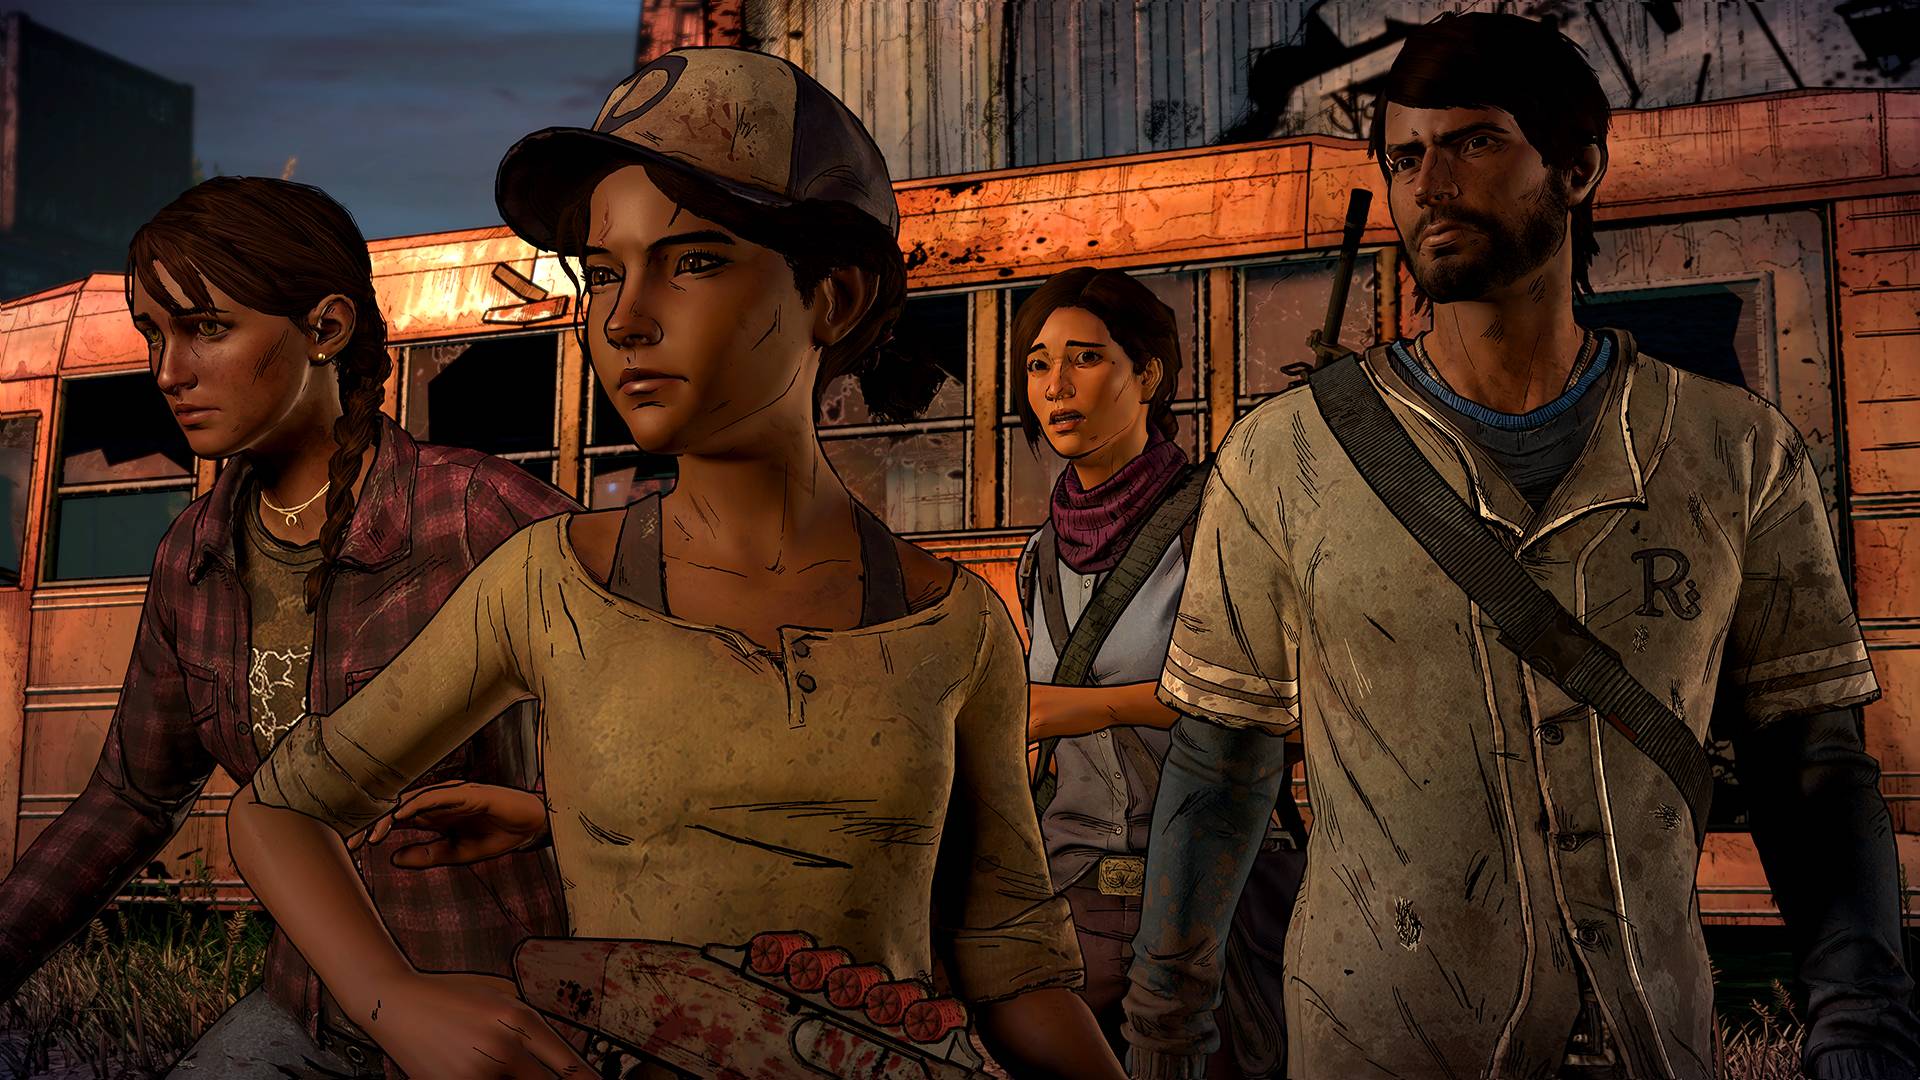 Video Game The Walking Dead: A New Frontier Wallpaper